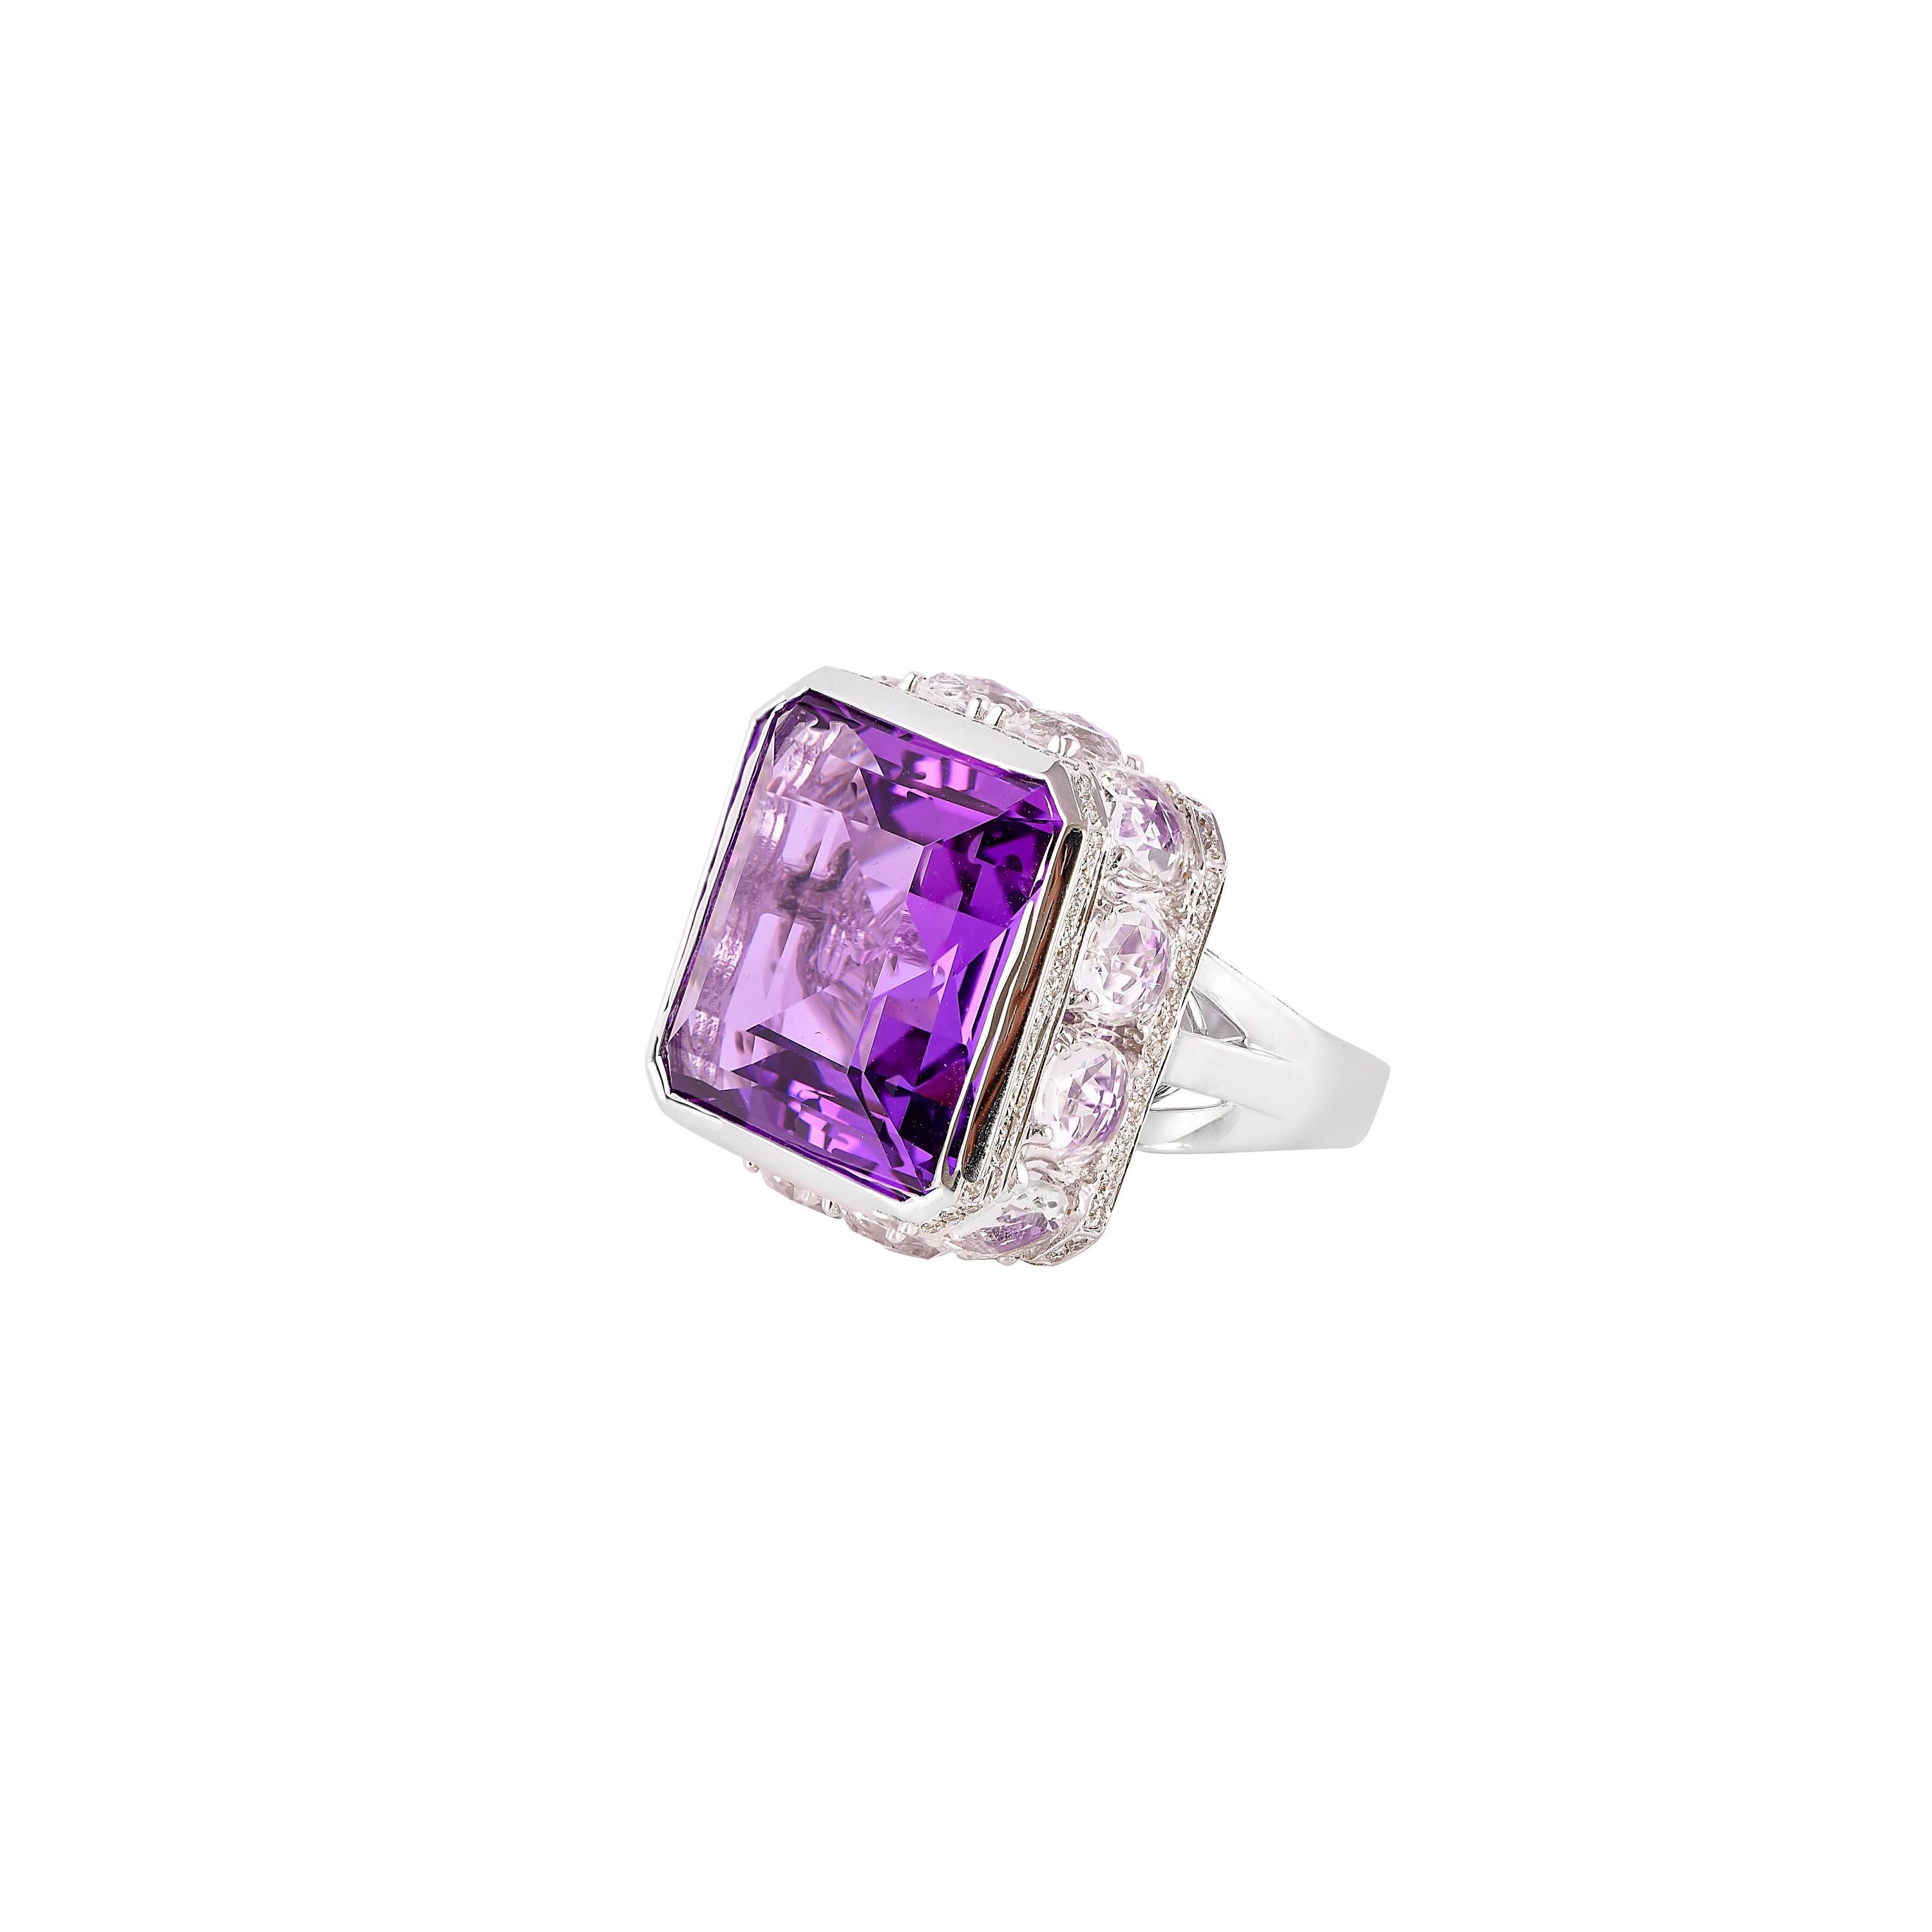 Women's 22.2 Carat Amethyst and Diamond Cocktail Ring in 18 Karat White Gold For Sale